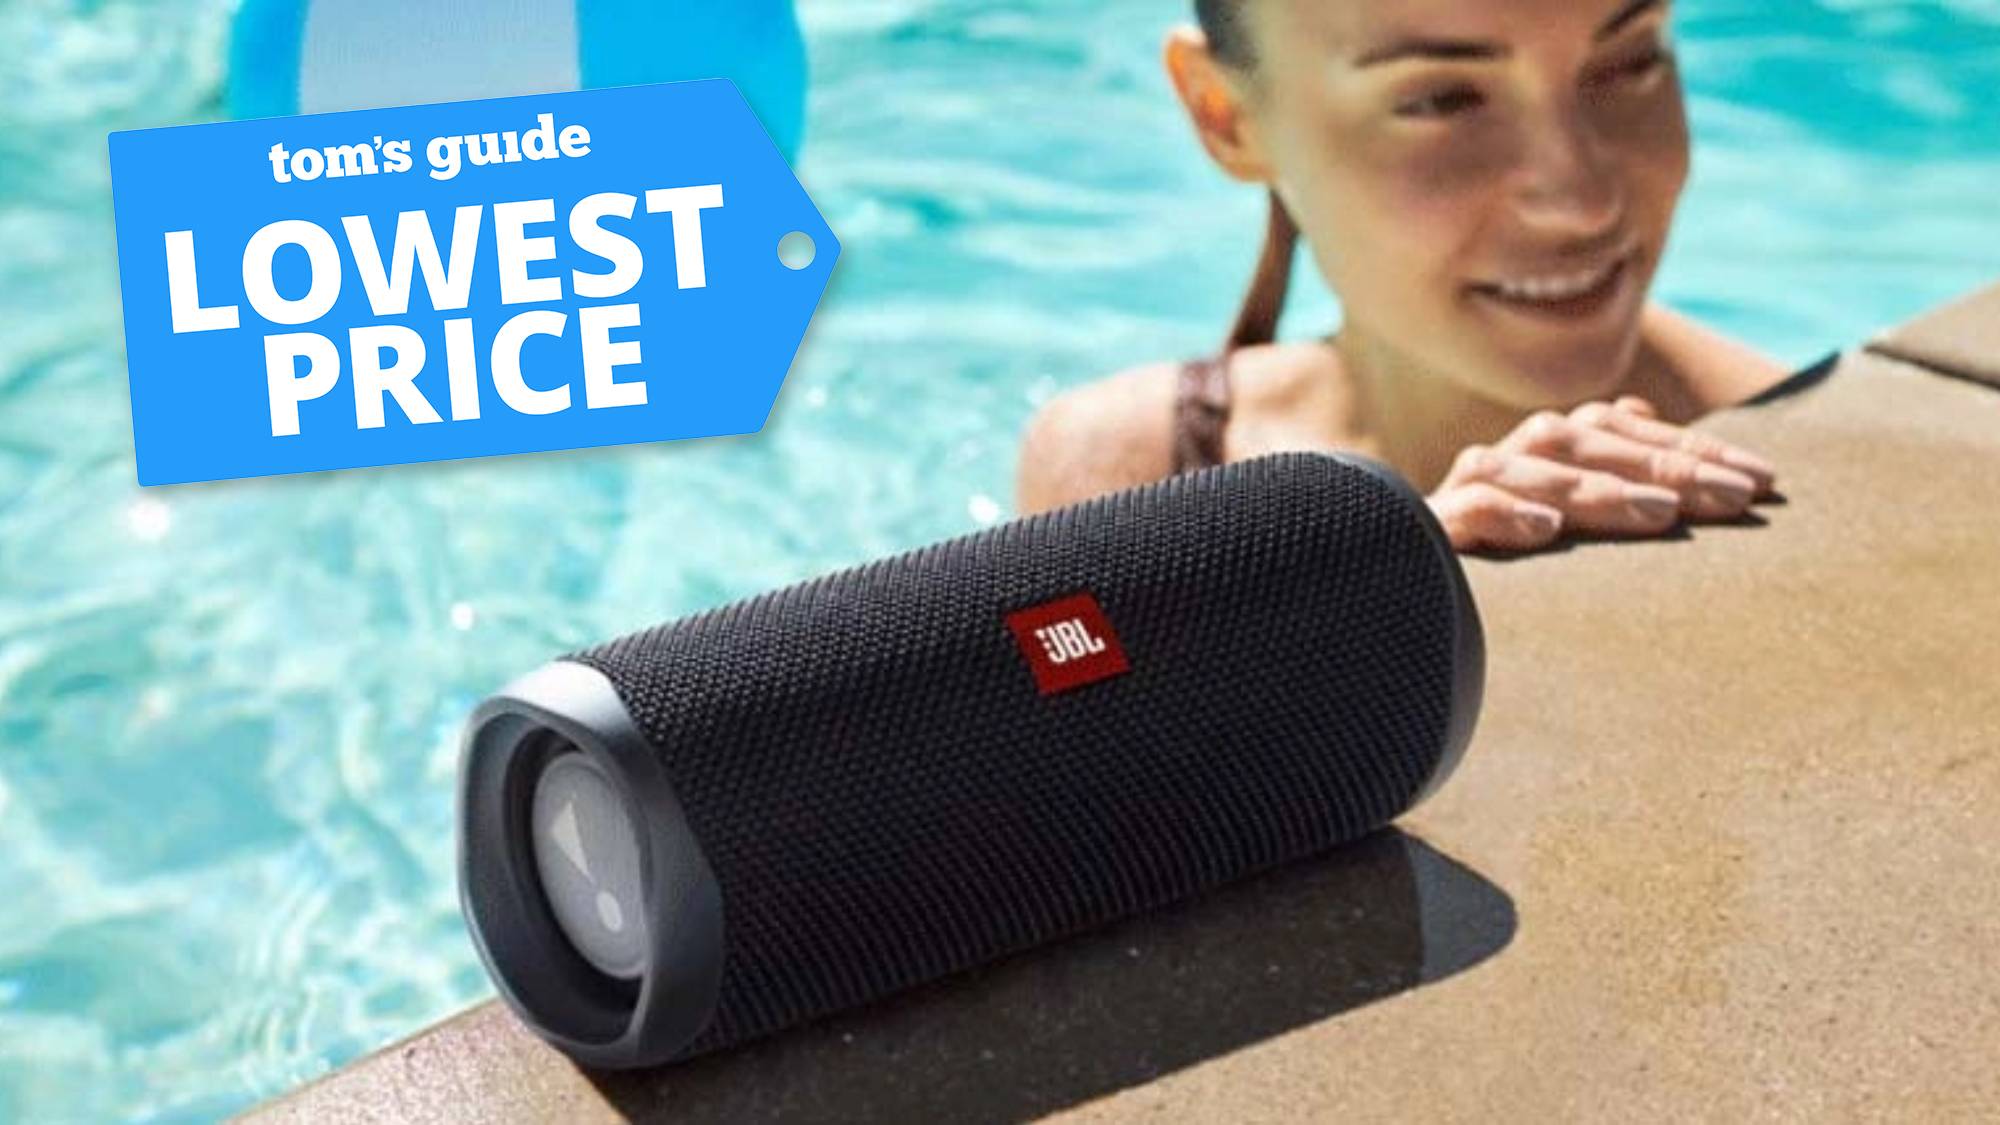 This JBL Bluetooth speaker is down to $69 for Cyber Monday and Black Friday Tom's